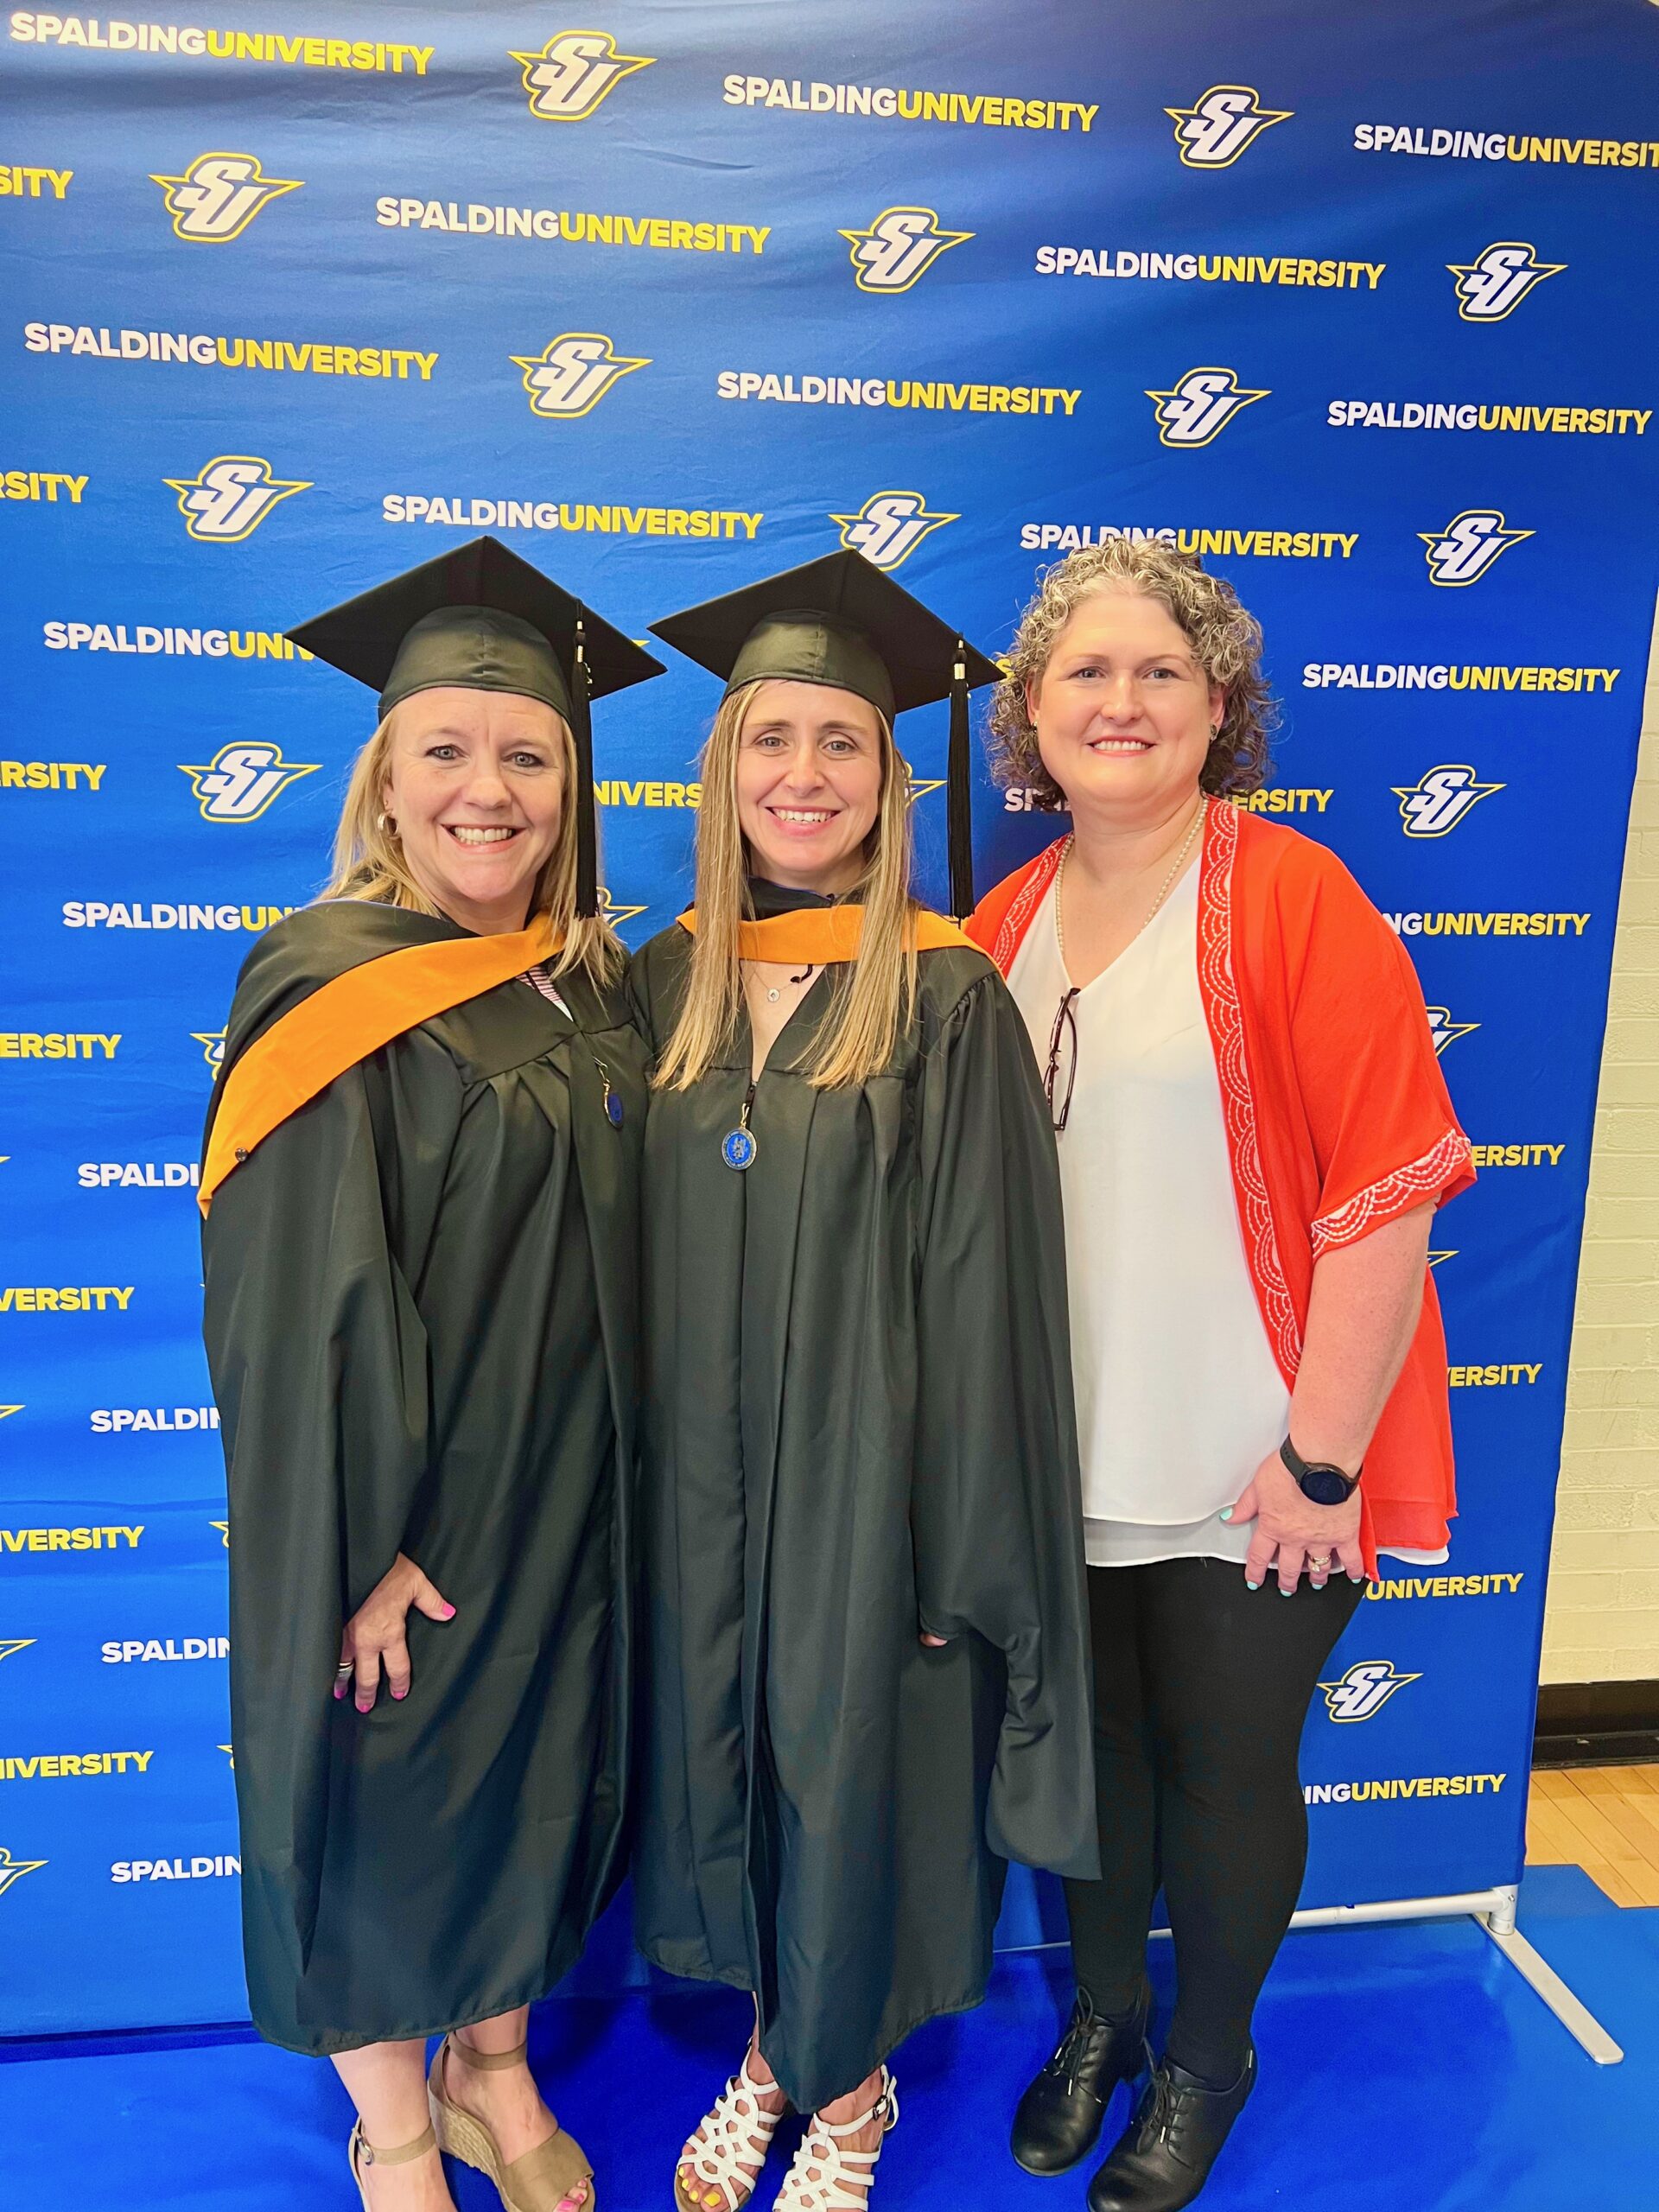 Two Spalding master's graduates posing with mom in front of Spalding Athletics backdrop